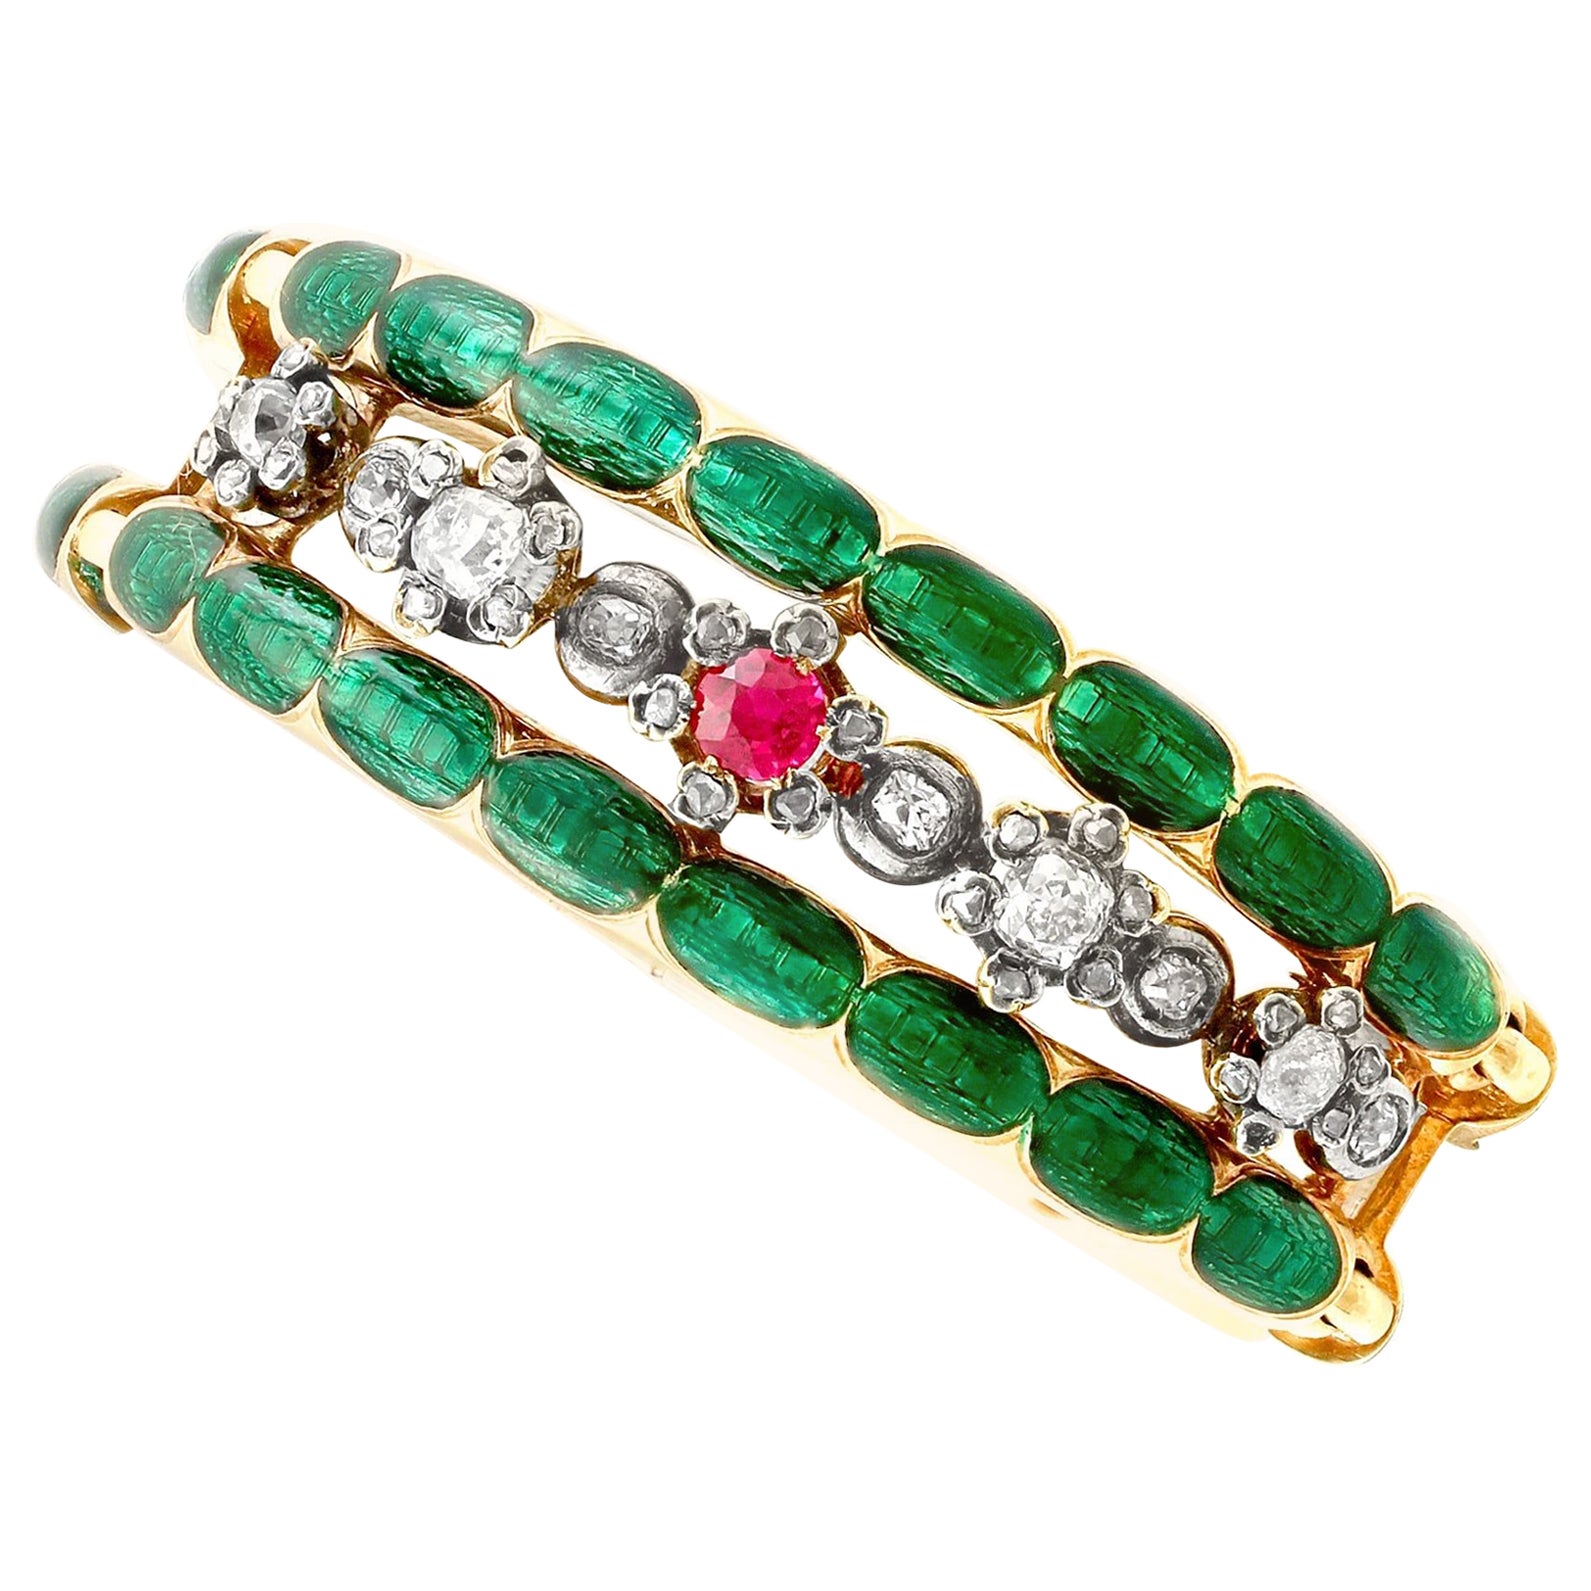 Antique Russian 2.86 Carat Diamond Synthetic Ruby and Enamel and Gold Bangle